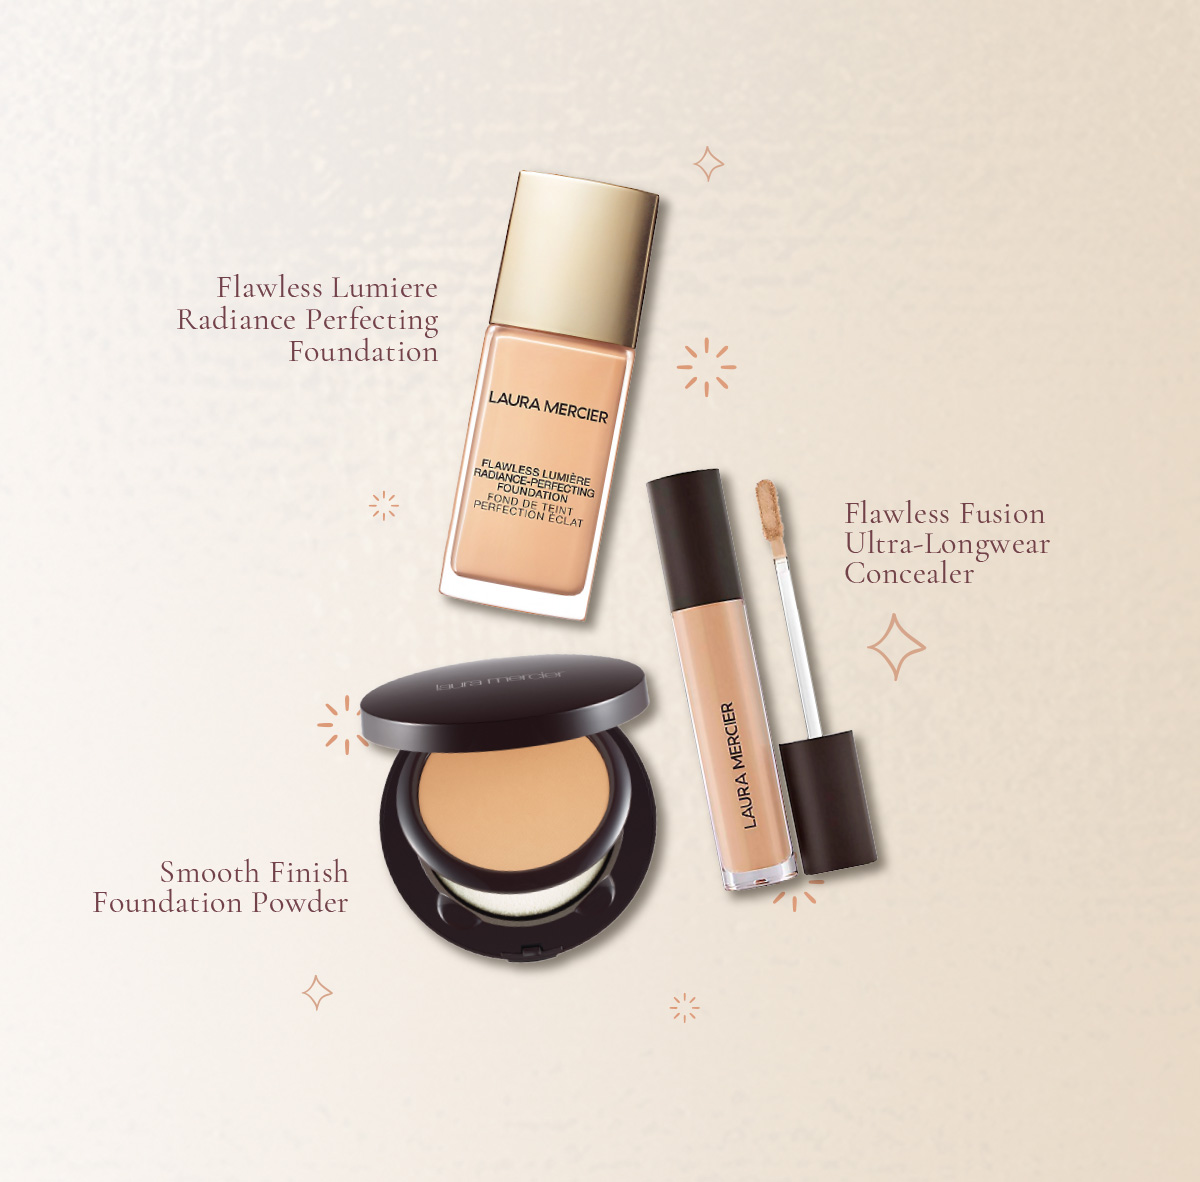 Flawless Lumiere Radiance Perfecting Foundation, Flawless Fusion Ultra-Longwear Concealer, Smooth Finish Foundation Powder